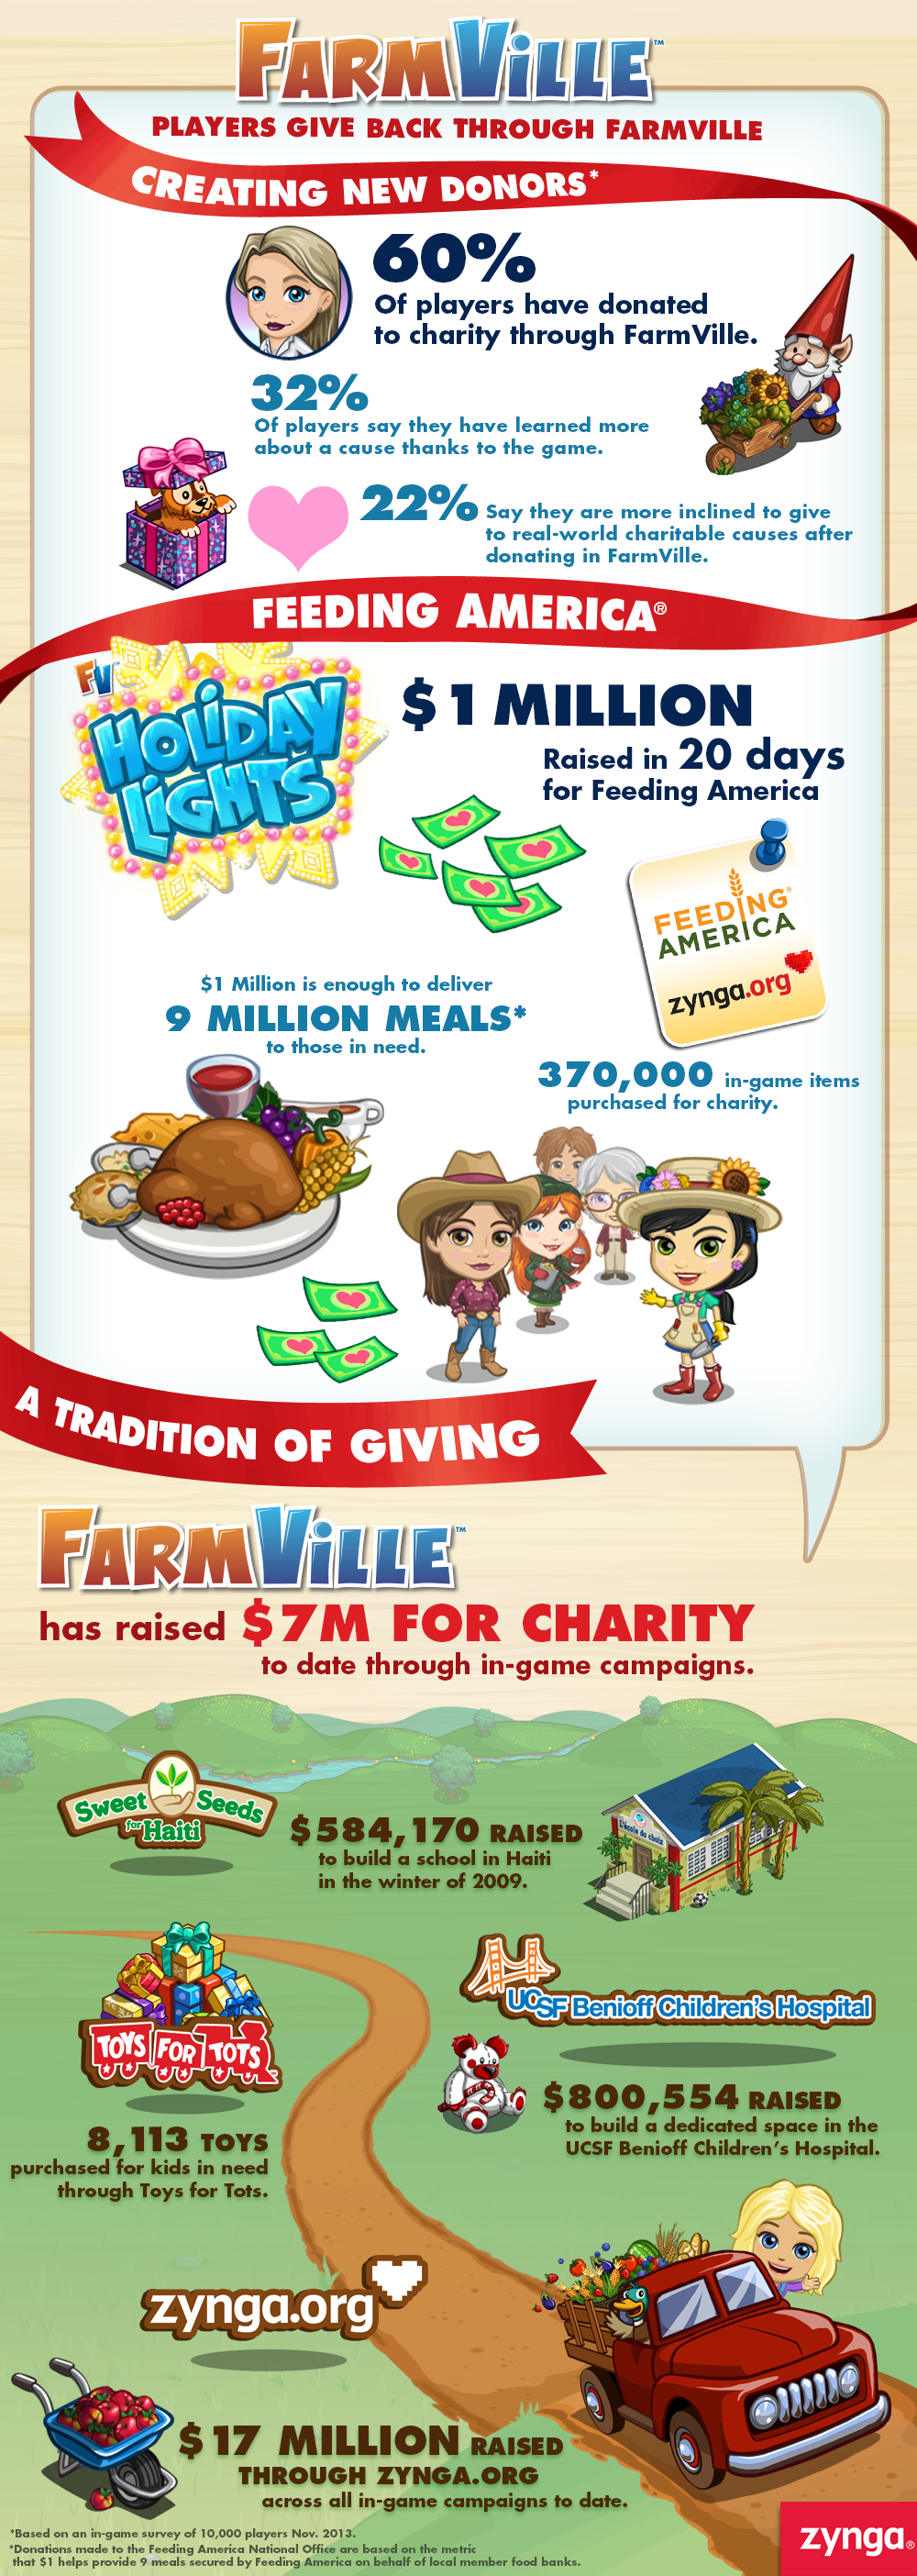 FarmVille_Charity_Infographic_Final